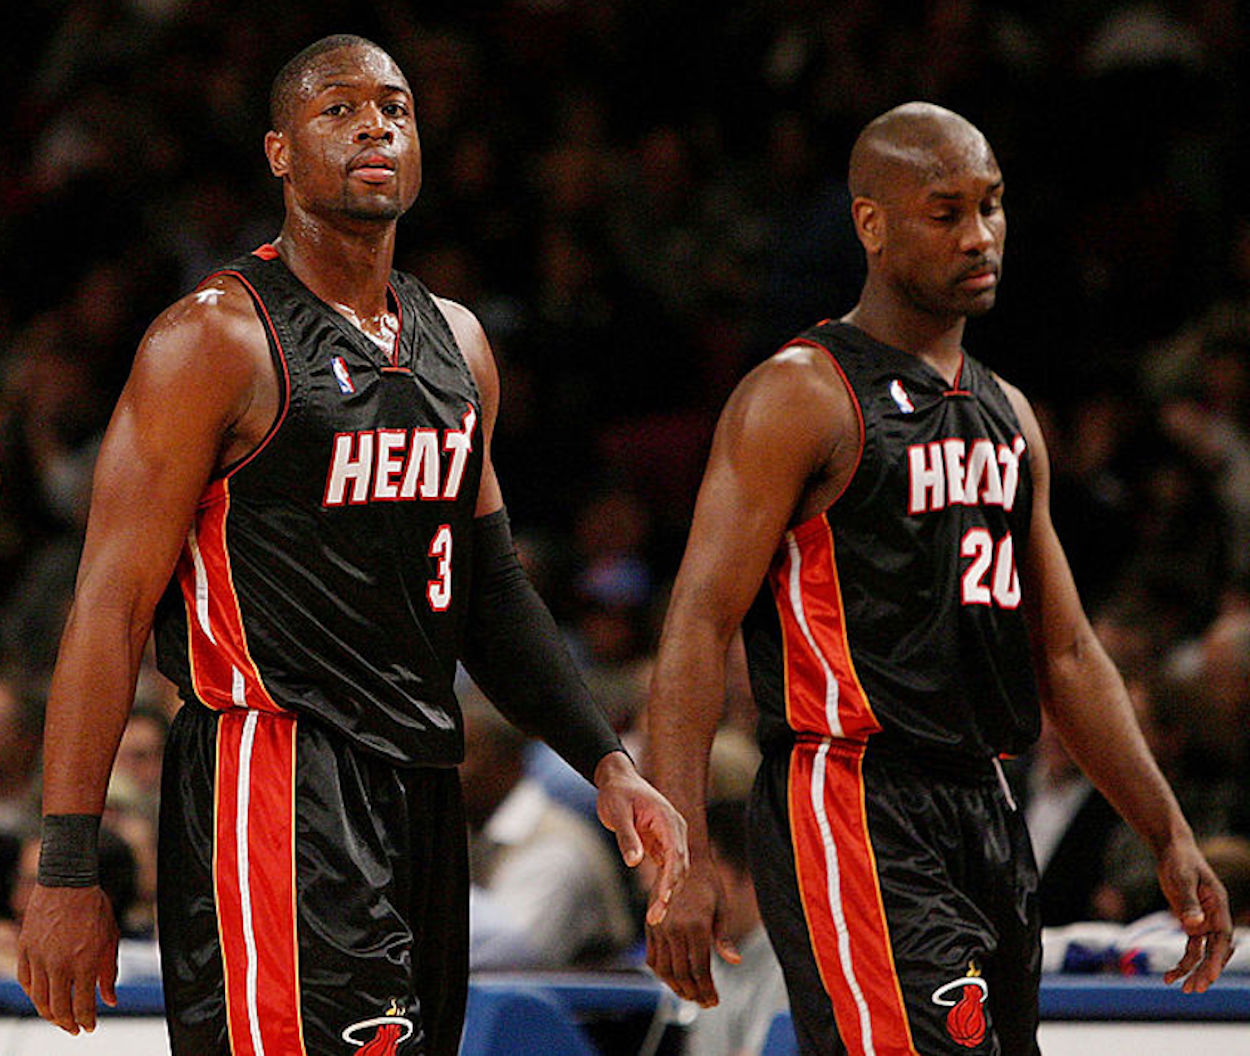 Gary Payton (R) and Dwyane Wade (L) together during their time with the Miami Heat.